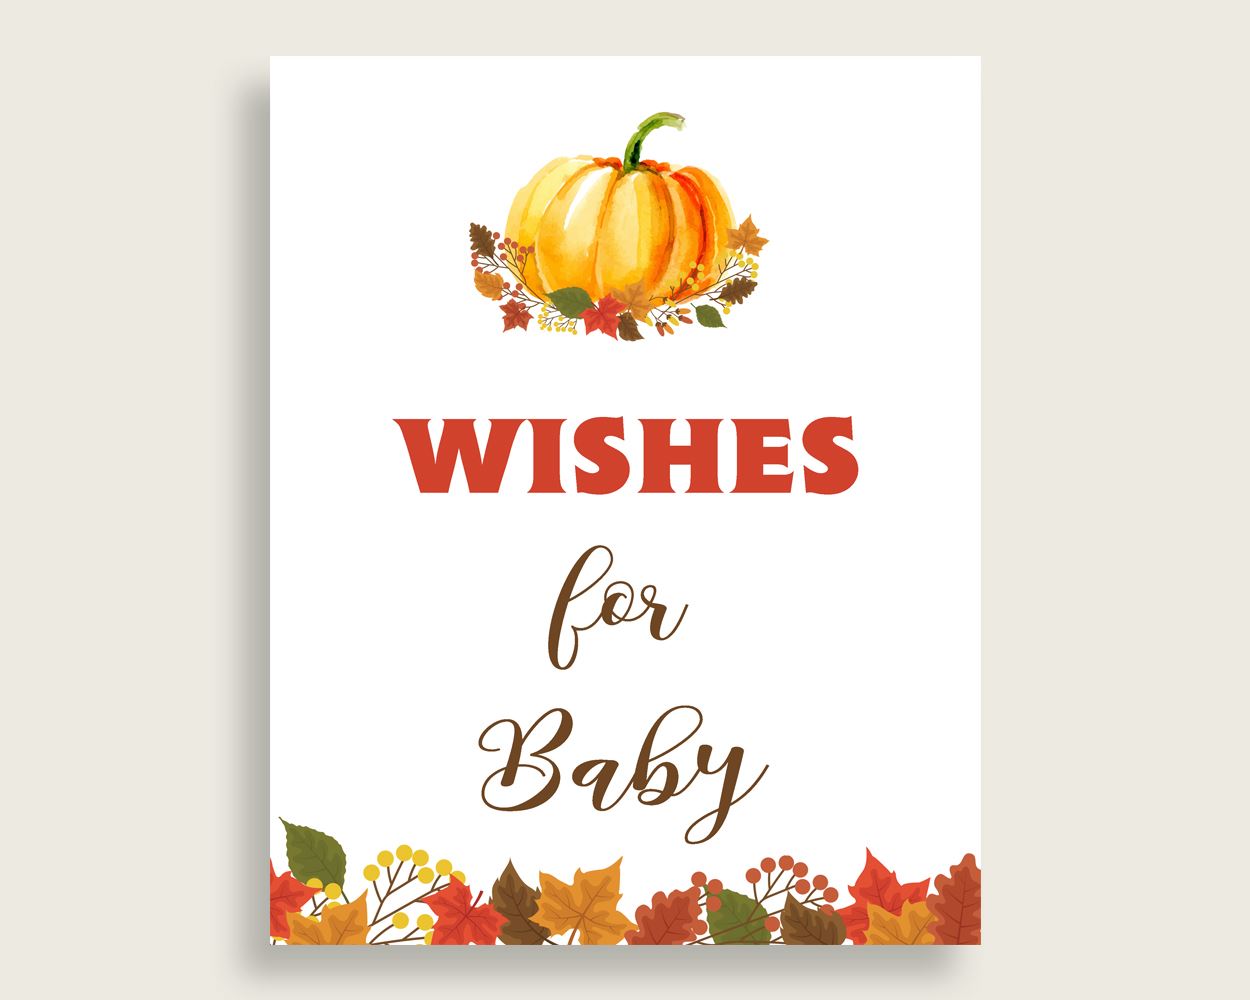 Wishes For Baby Baby Shower Wishes For Baby Fall Baby Shower Wishes For Baby Baby Shower Pumpkin Wishes For Baby Orange Brown prints BPK3D - Digital Product